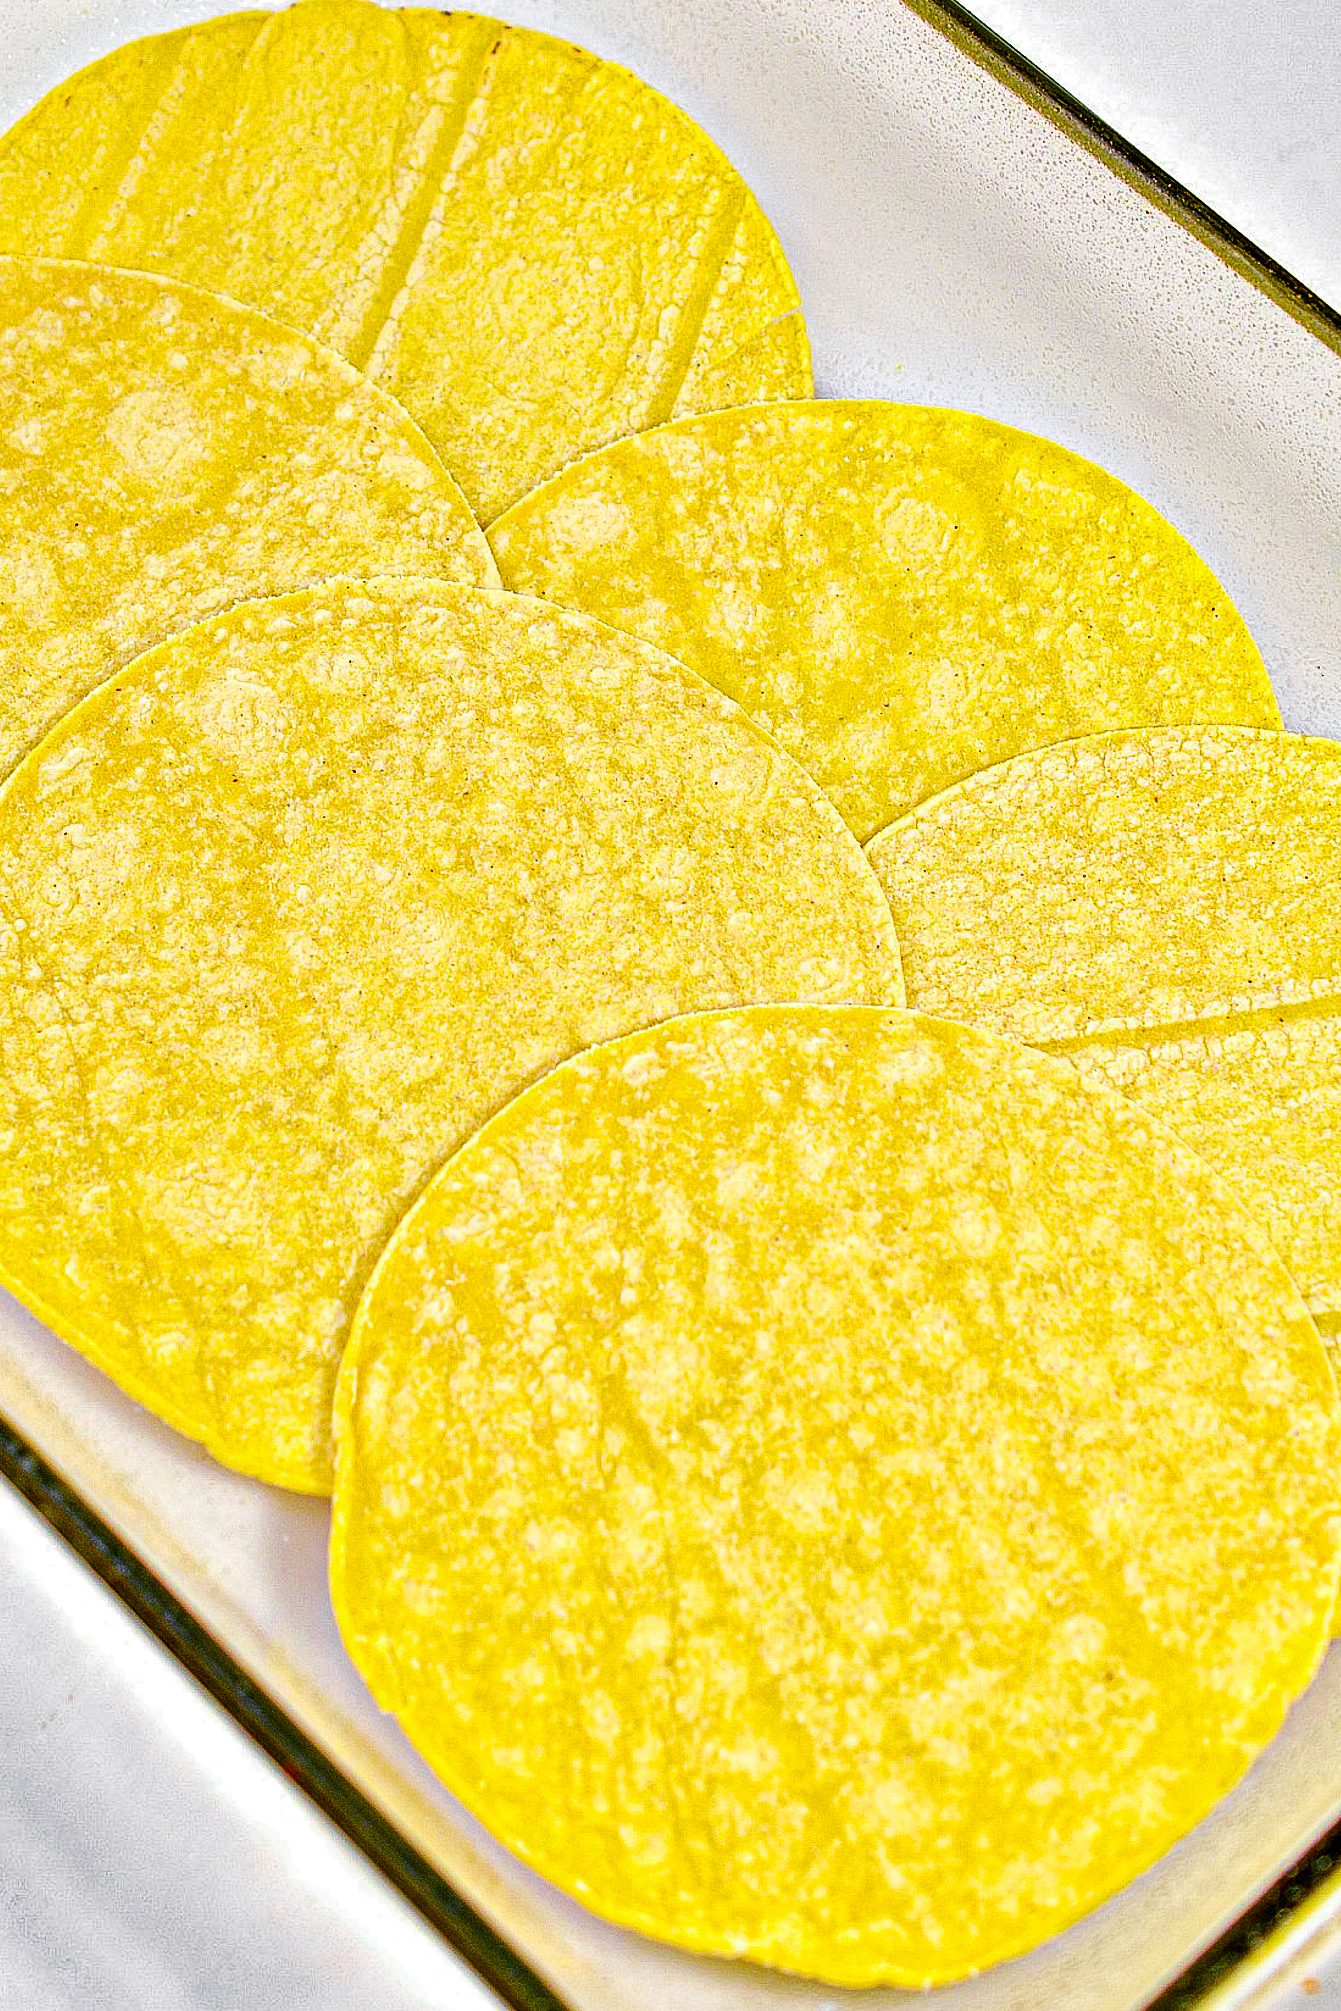 Layer 6 small corn tortillas in the bottom of a well-greased 9x13 baking dish.